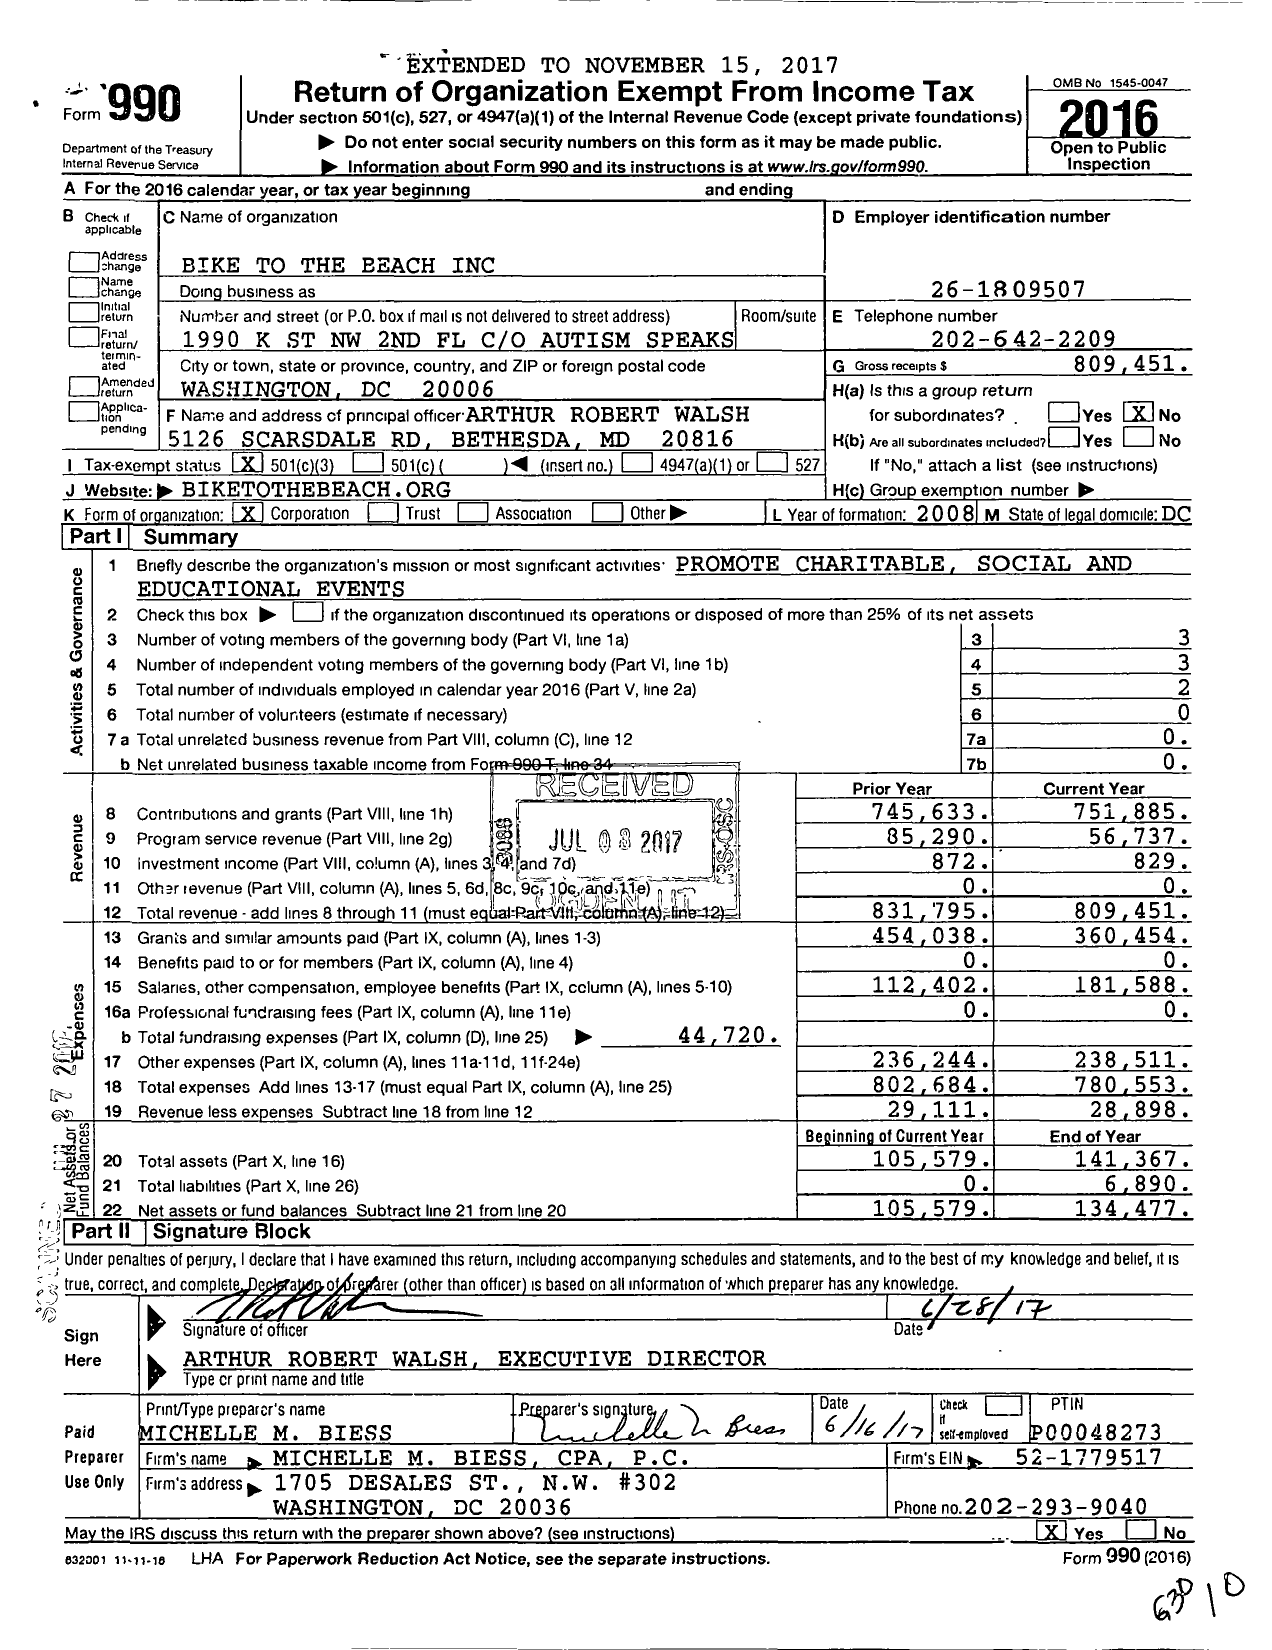 Image of first page of 2016 Form 990 for the Add Impact Network